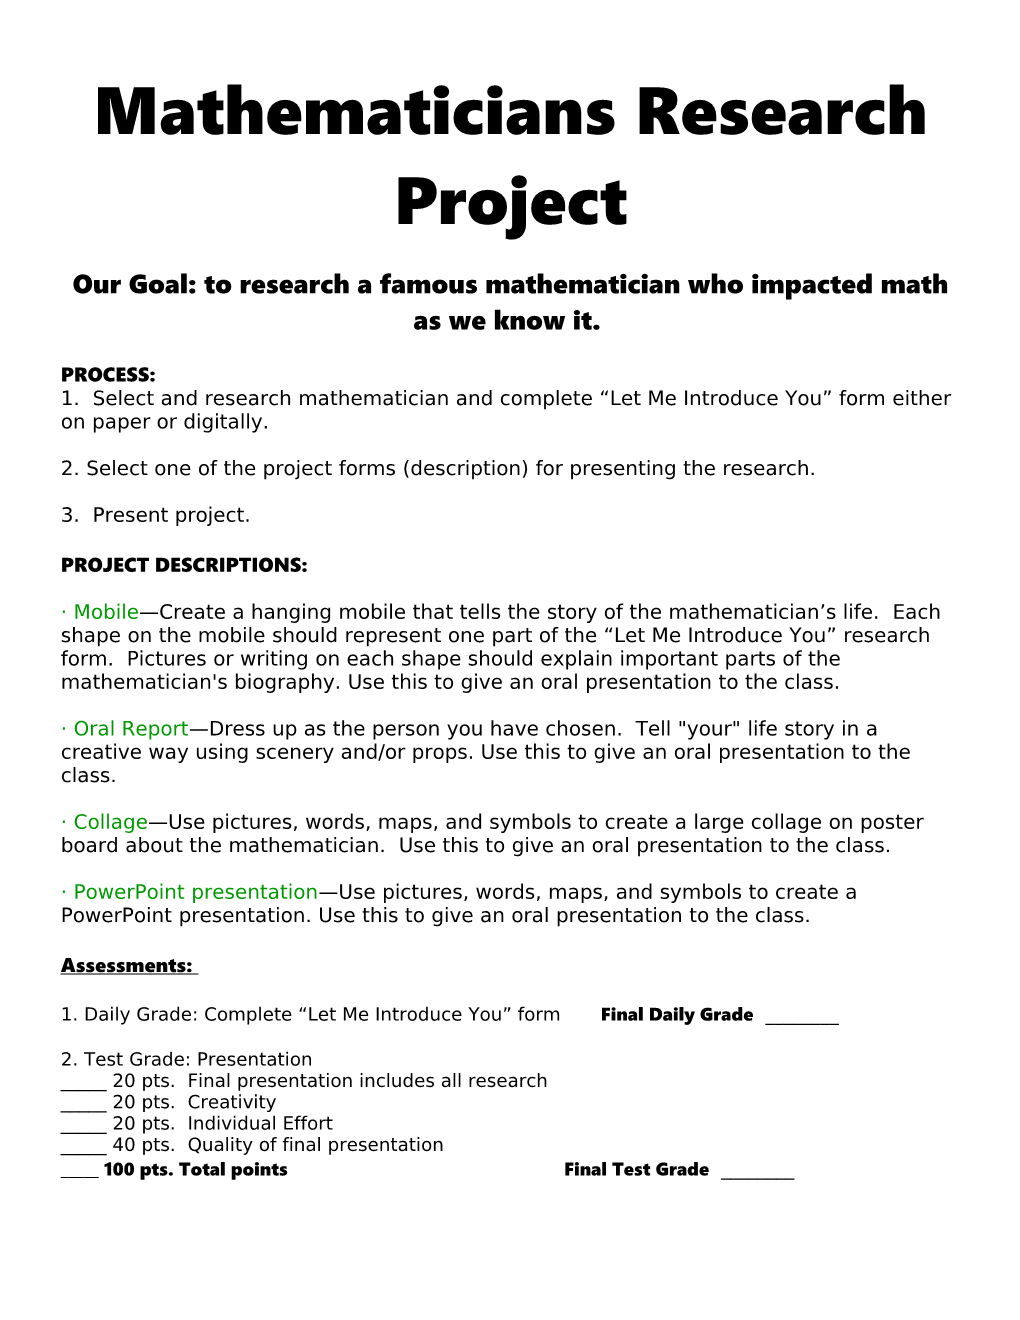 Mathematicians Research Projects